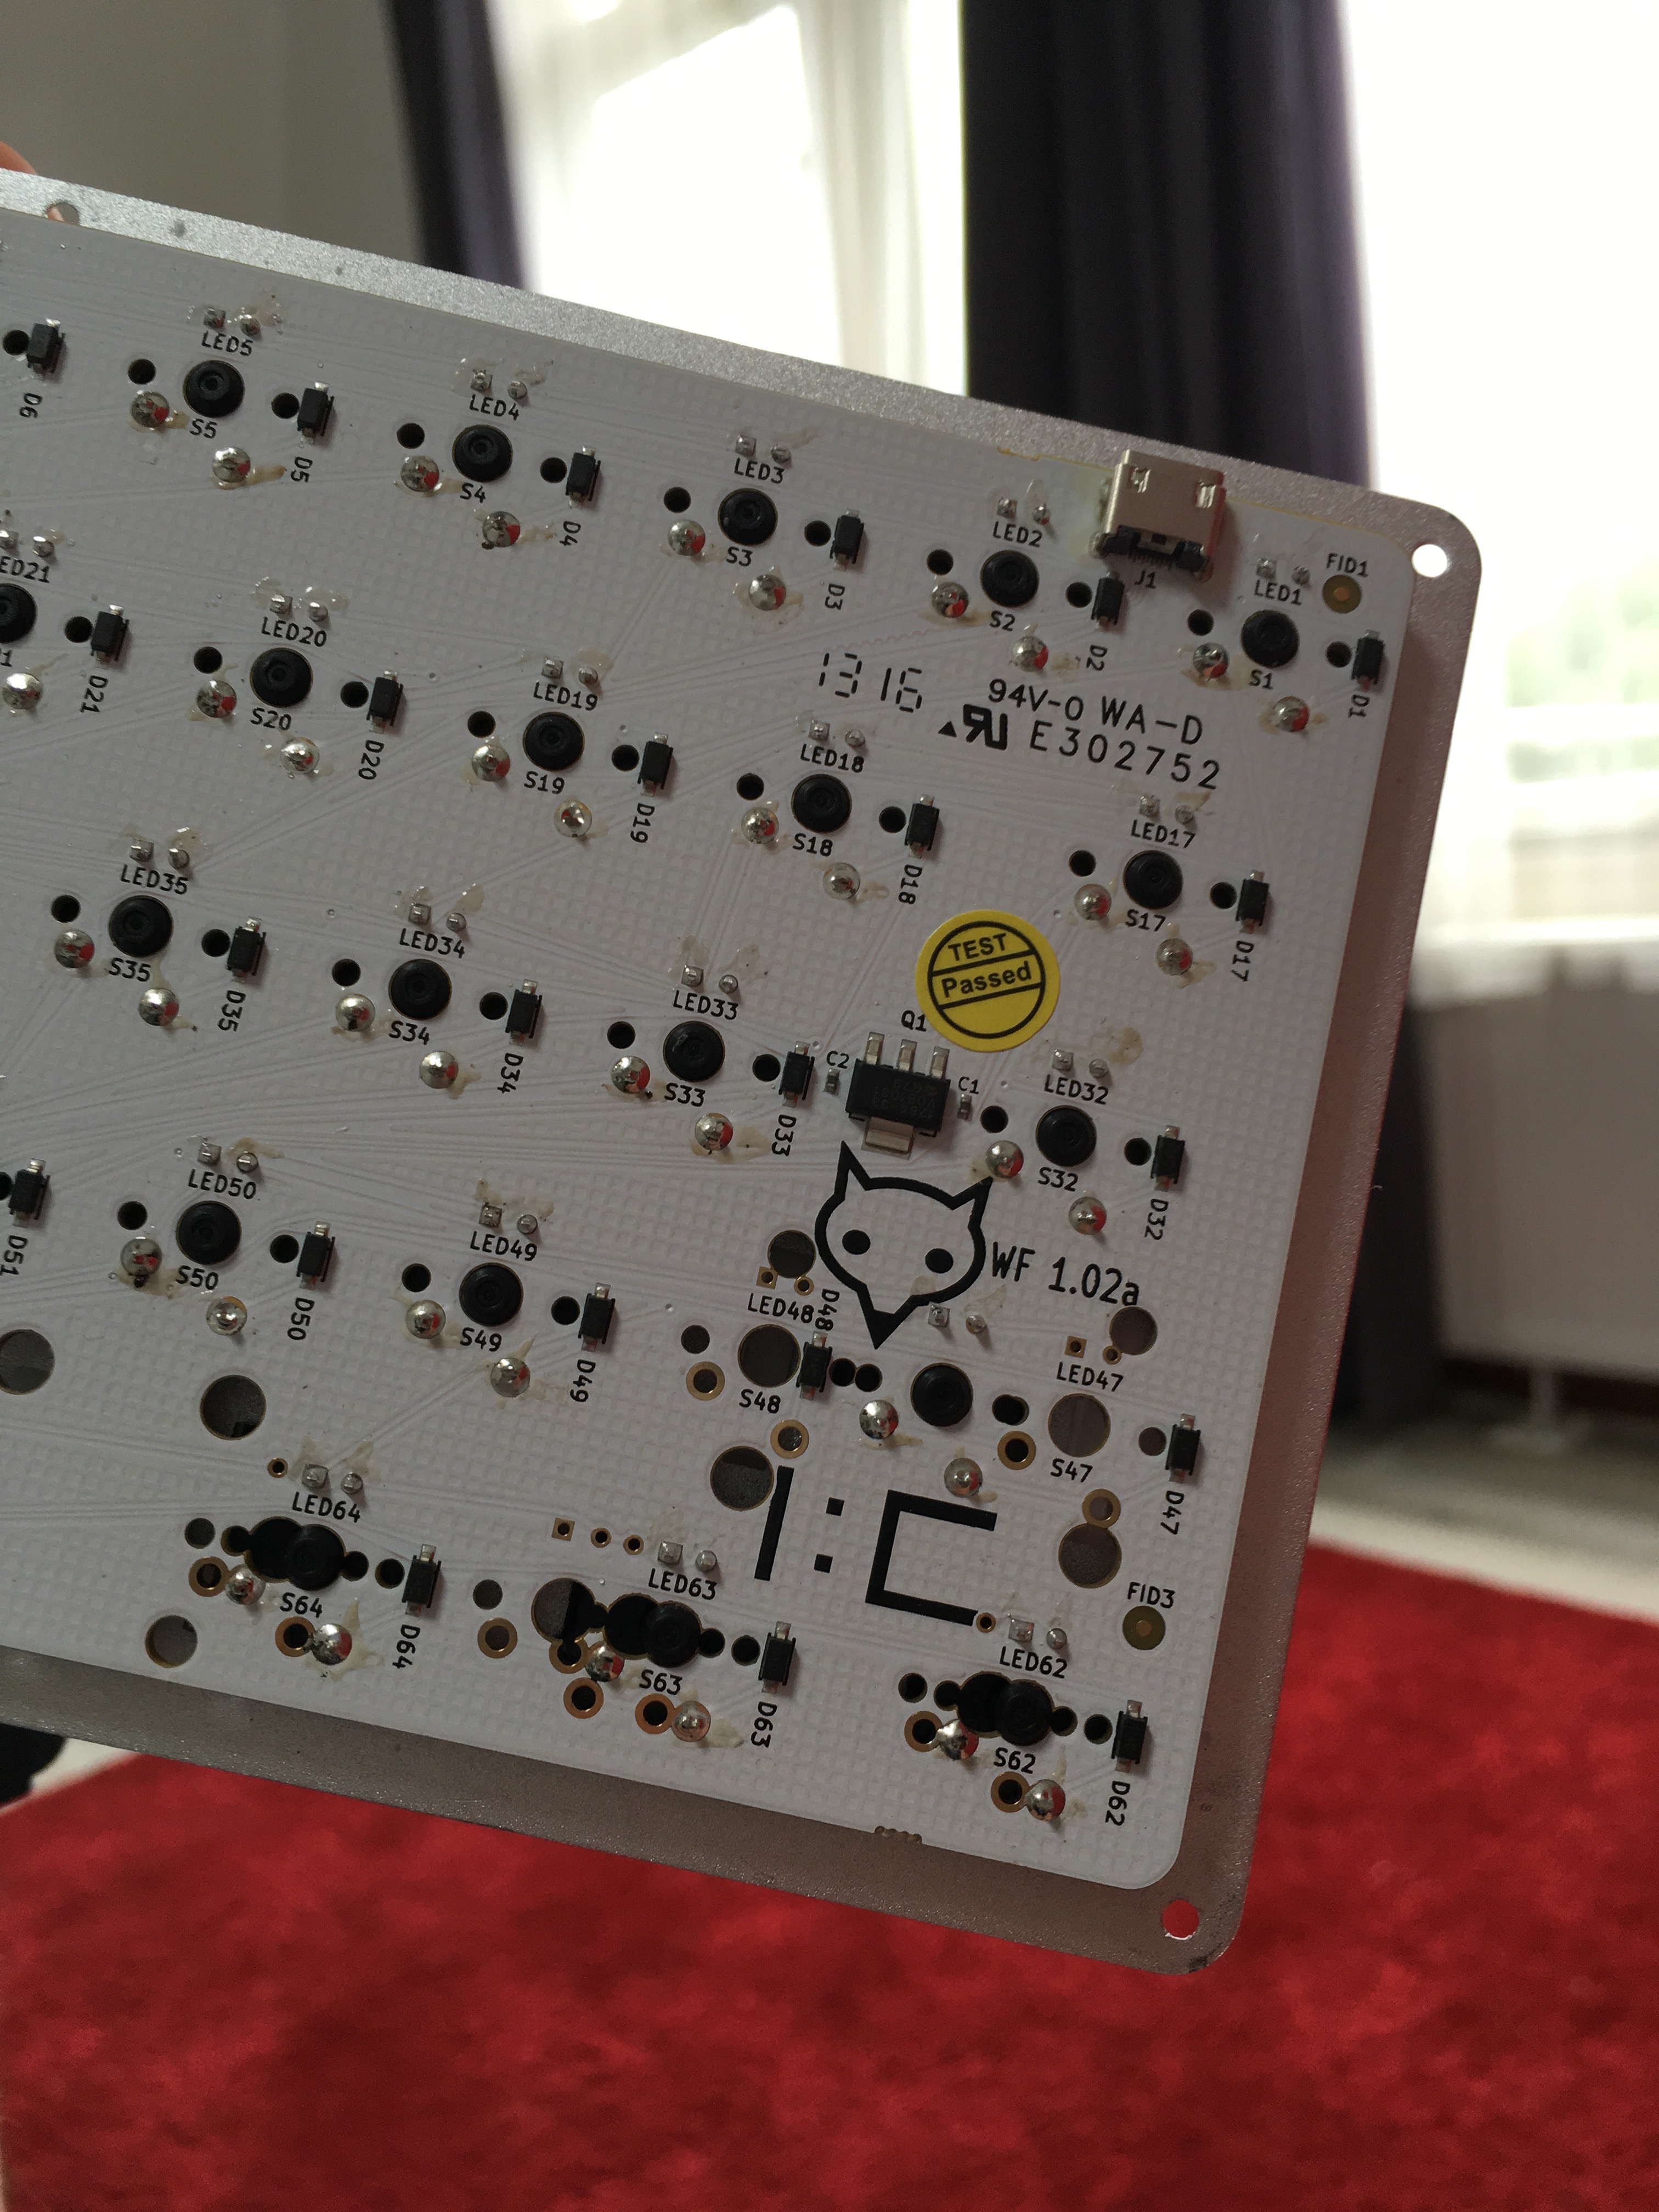 The PCB of the Whitefox keyboard